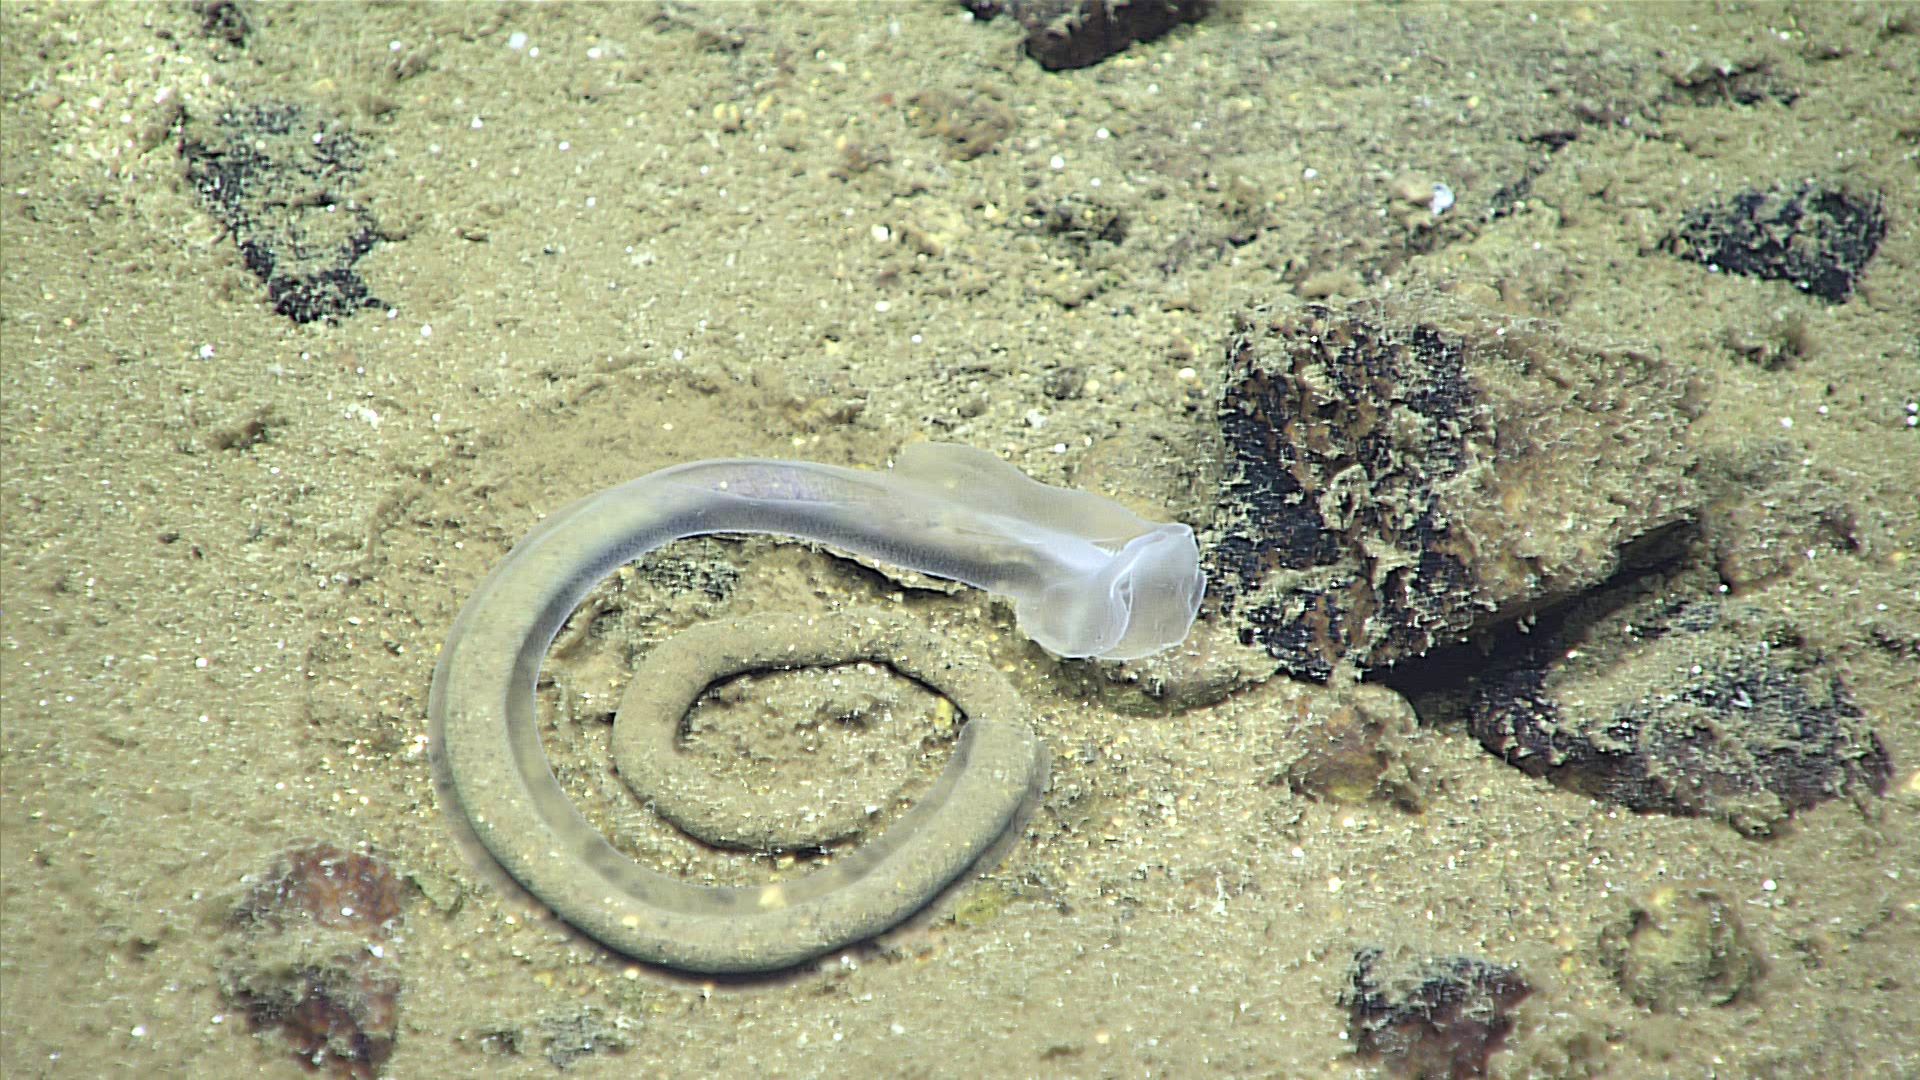 Enteropneust (or acorn worm), 2016 Deepwater Exploration of the Marianas.